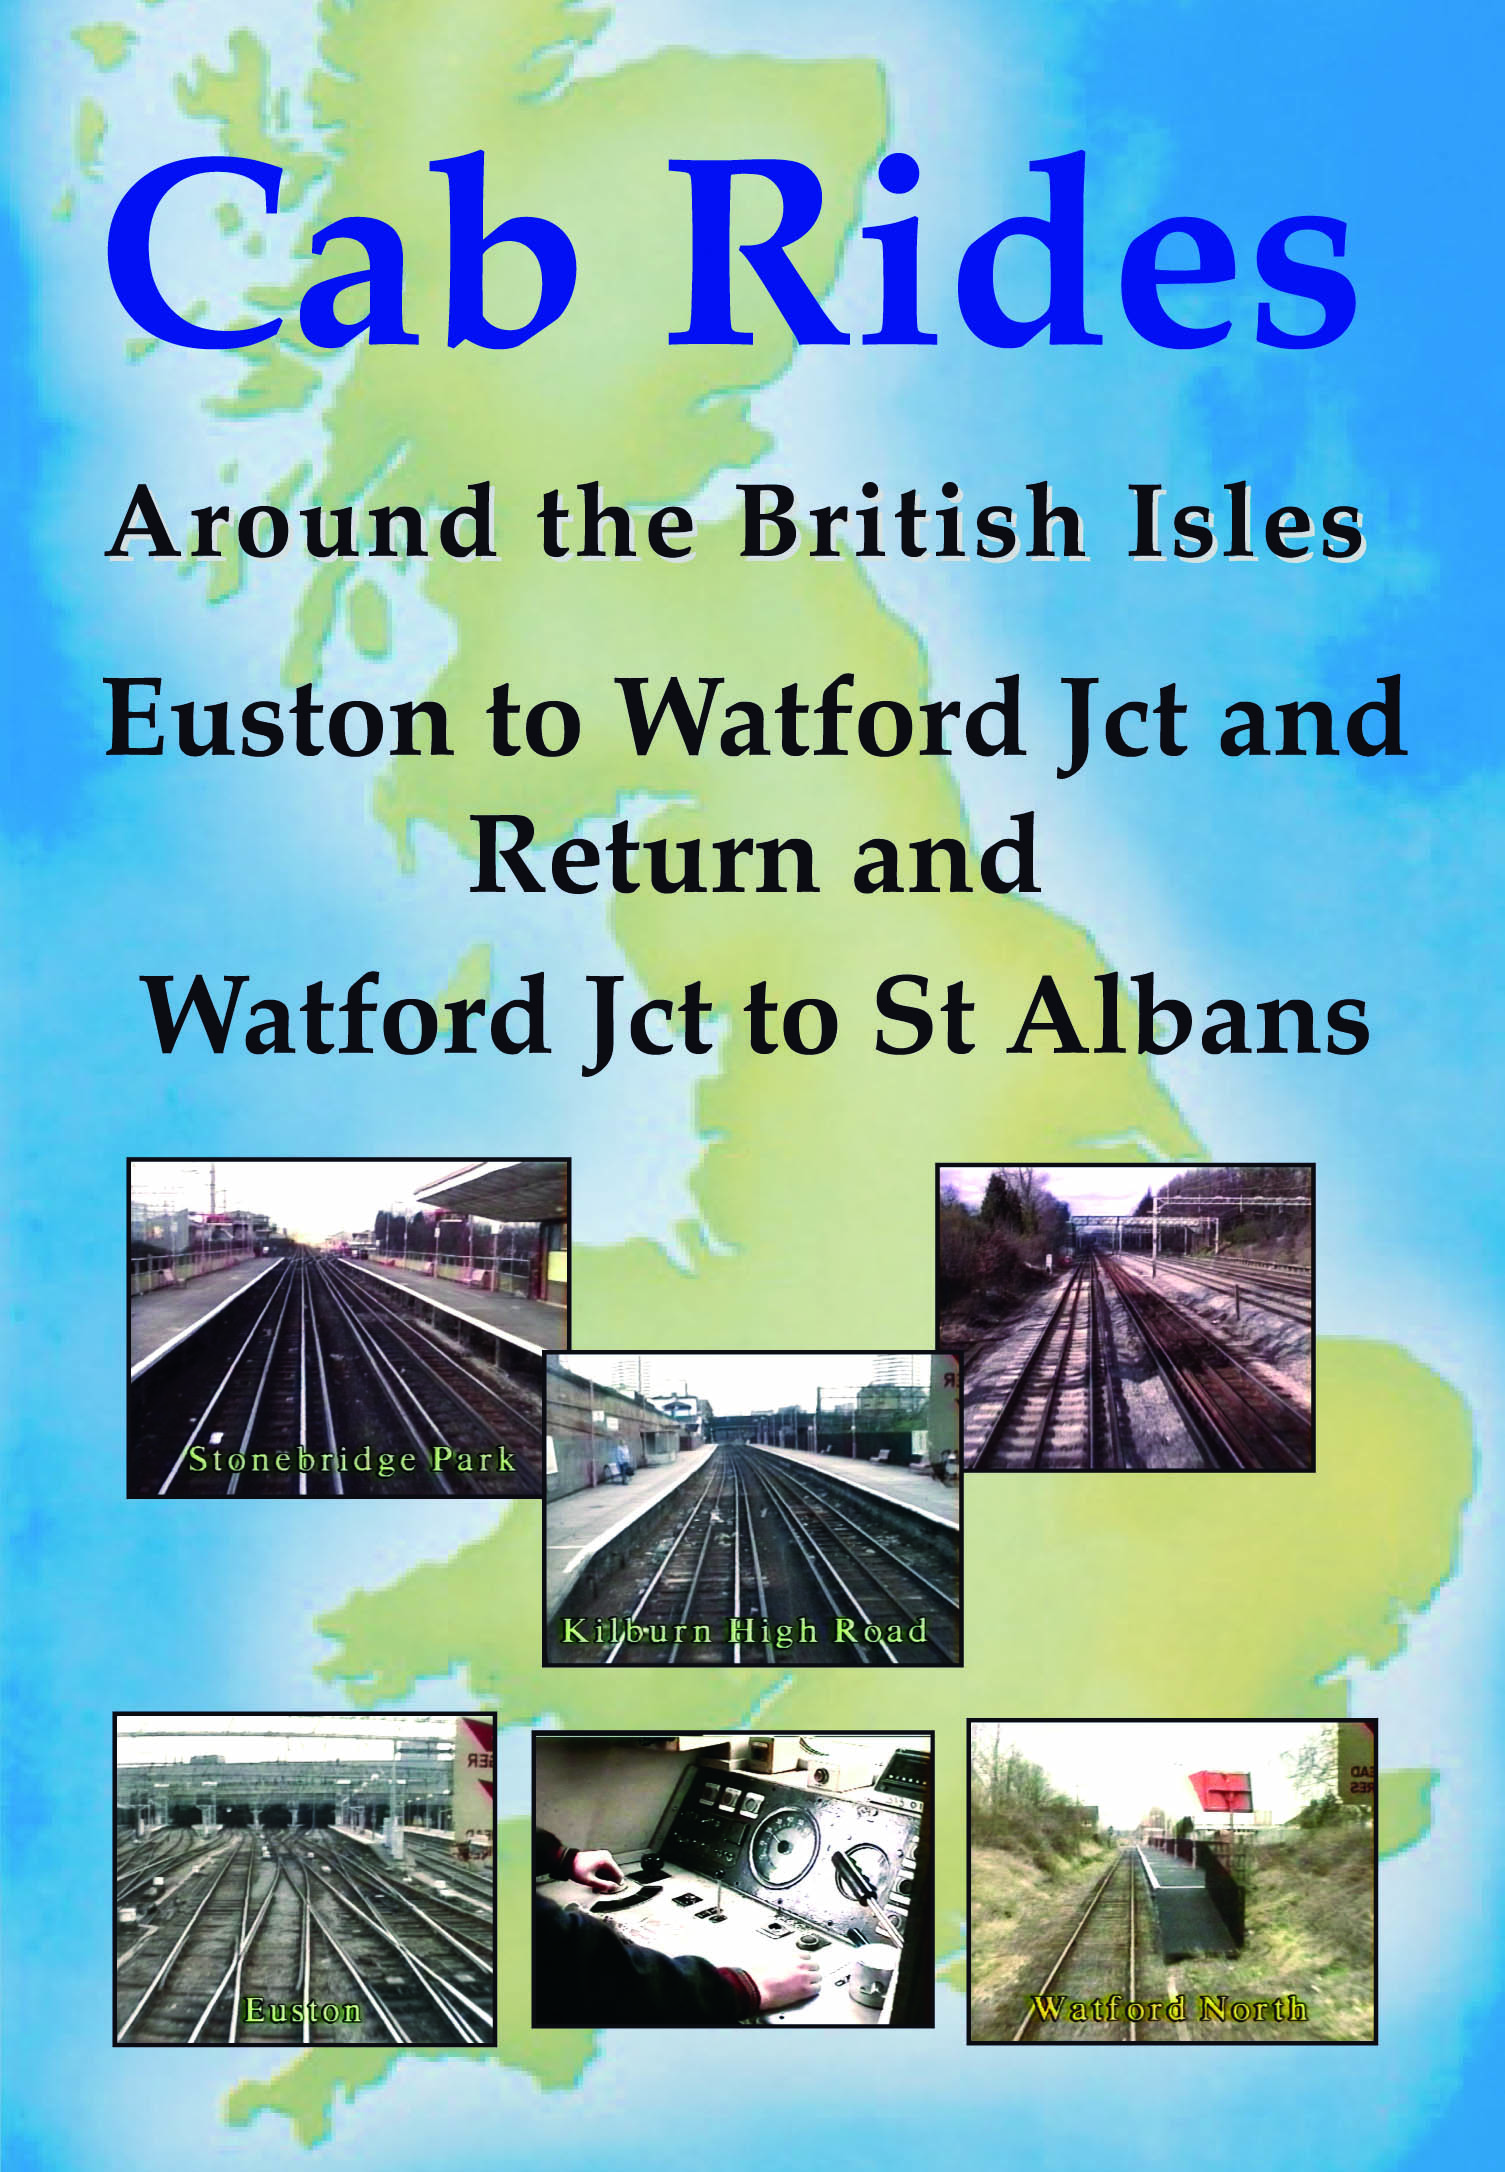 Cab Rides Around the British Isles: London Euston to Watford Junction and Return plus Watford Junction to St.Albans all in 1997